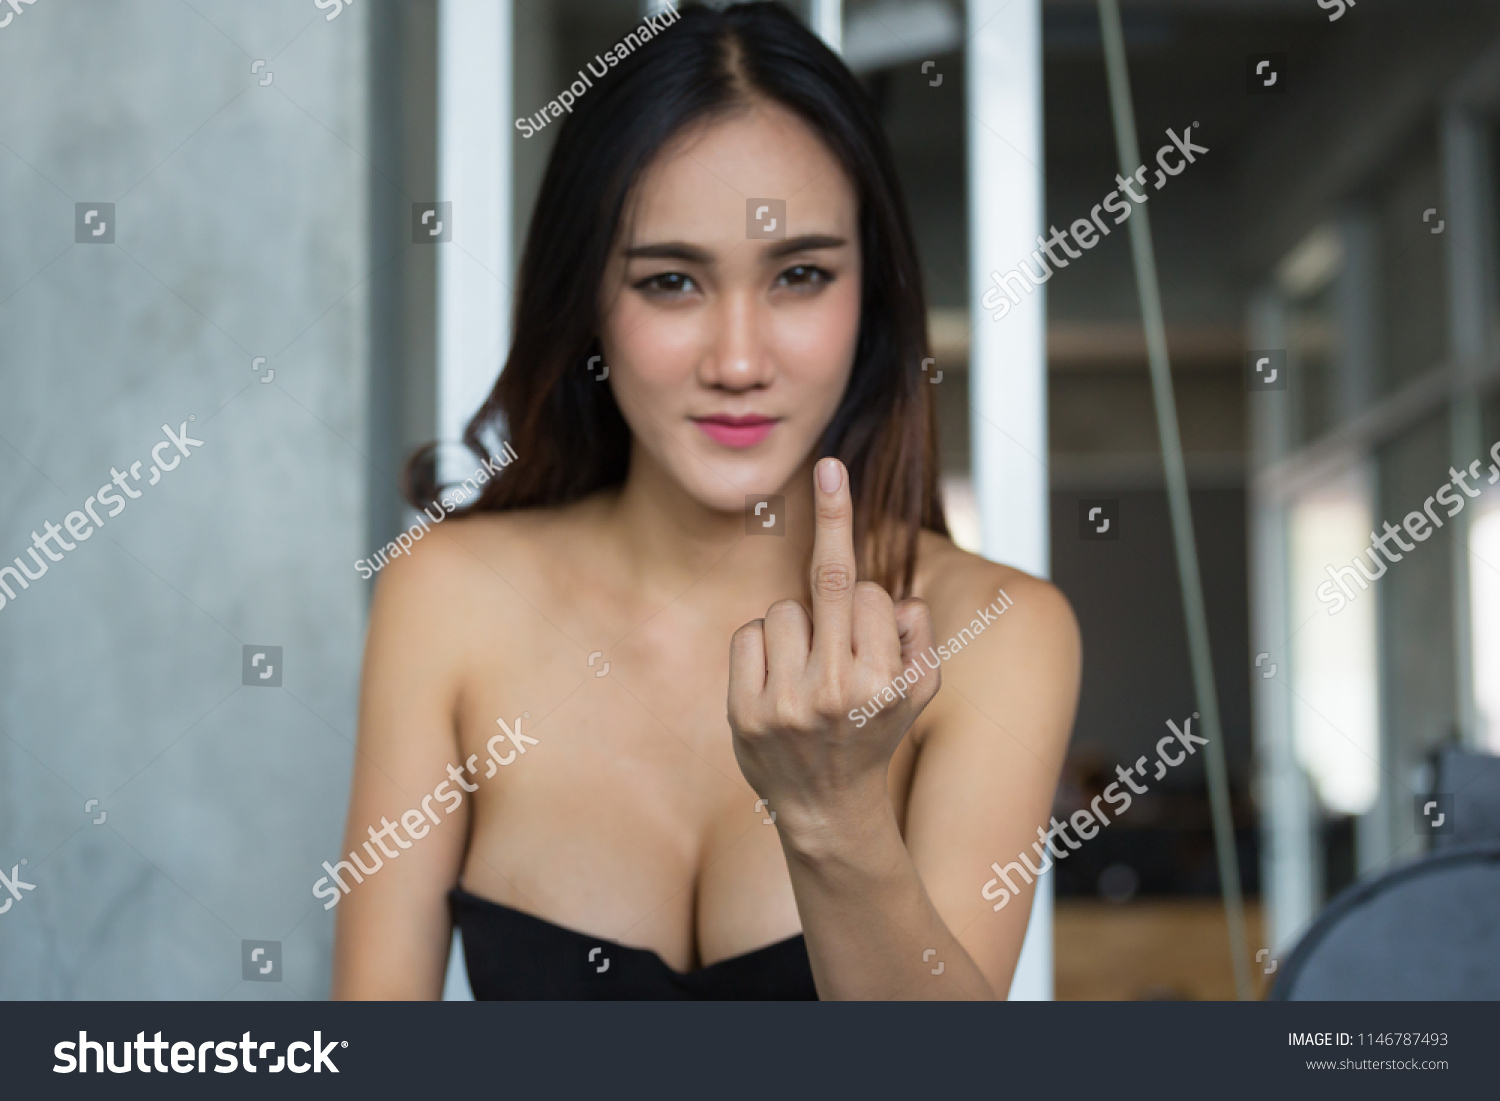 Sexy Young Woman Big Breast Woman Stock